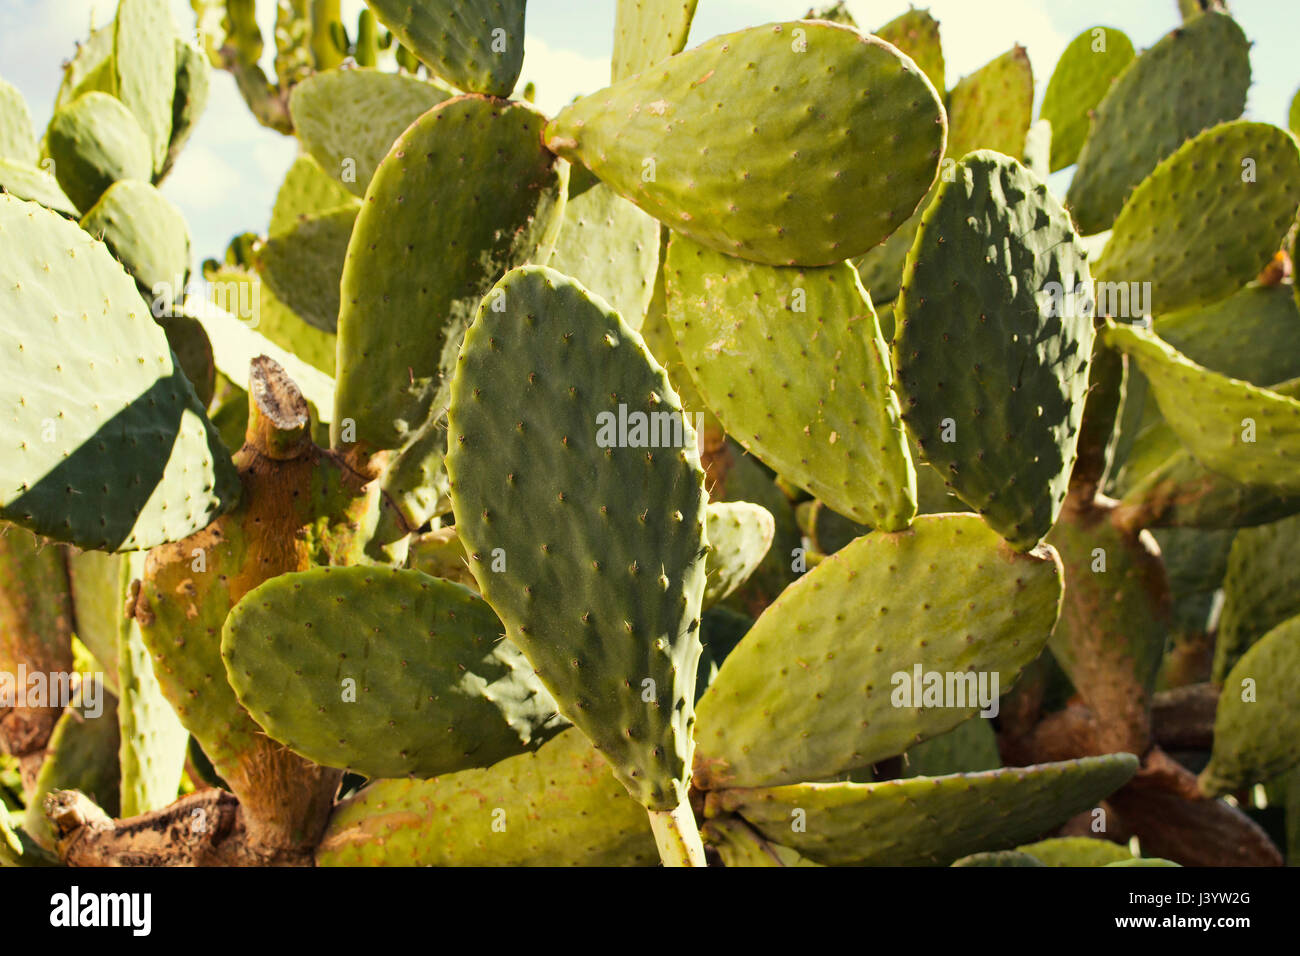 Close up view of Opuntia ficus-indica (Barbary fig) which is a type of cactus. It is a species of cactus that has long been a domesticated crop plant  Stock Photo